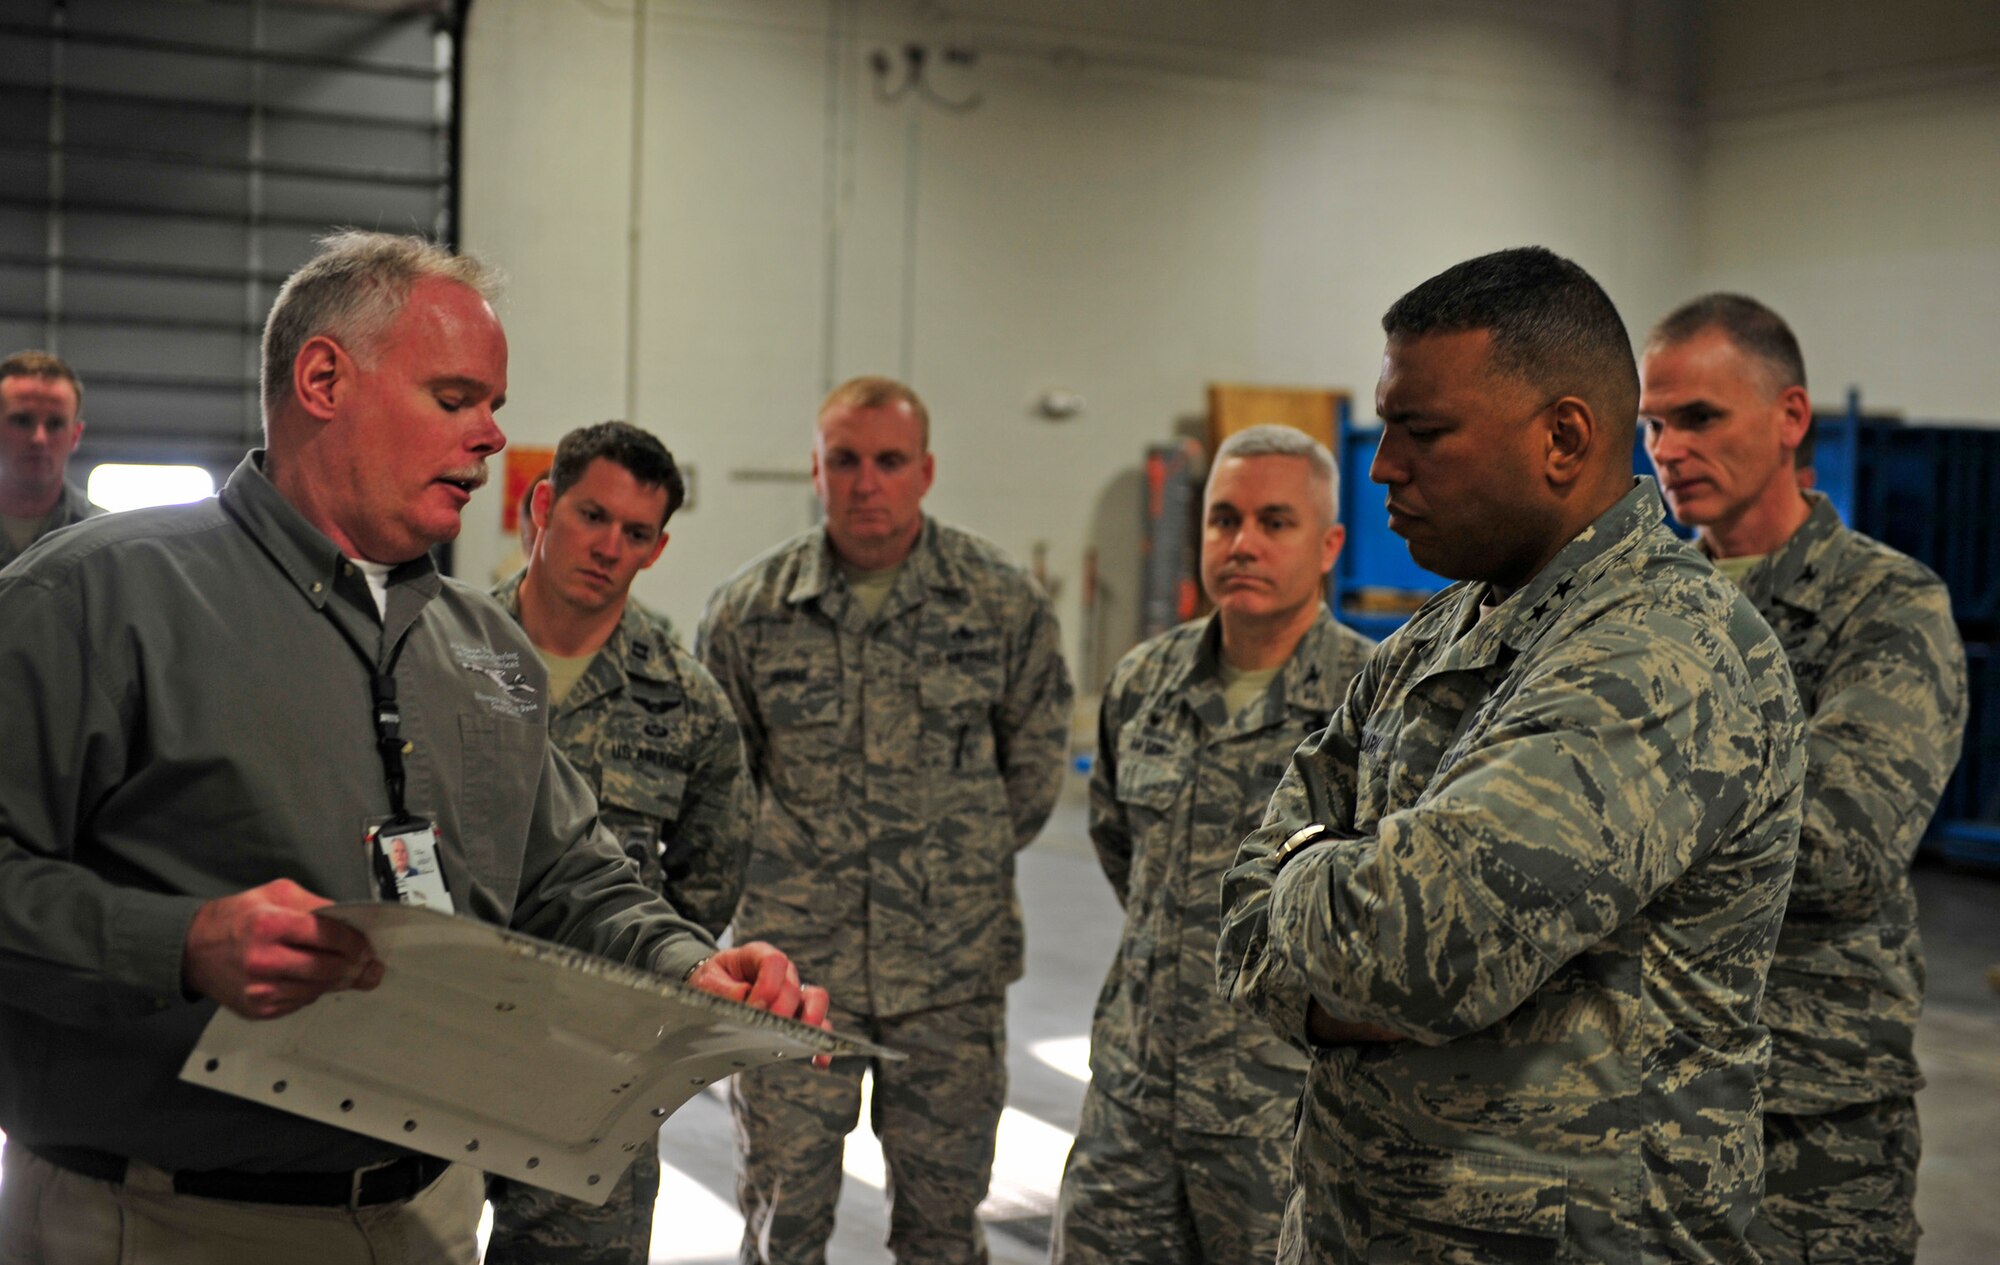 Maj. Gen. Richard Clark, Eighth Air Force commander, listens to a presentation about the cold spray system at Ellsworth Air Force Base, S.D., Jan. 19, 2016. Ellsworth is one of the first bases to implement the cold spray system, which has the potential to save the Air Force millions of dollars when repairing damages. (U.S. Air Force photo by Airman 1st Class James L. Miller/Released)